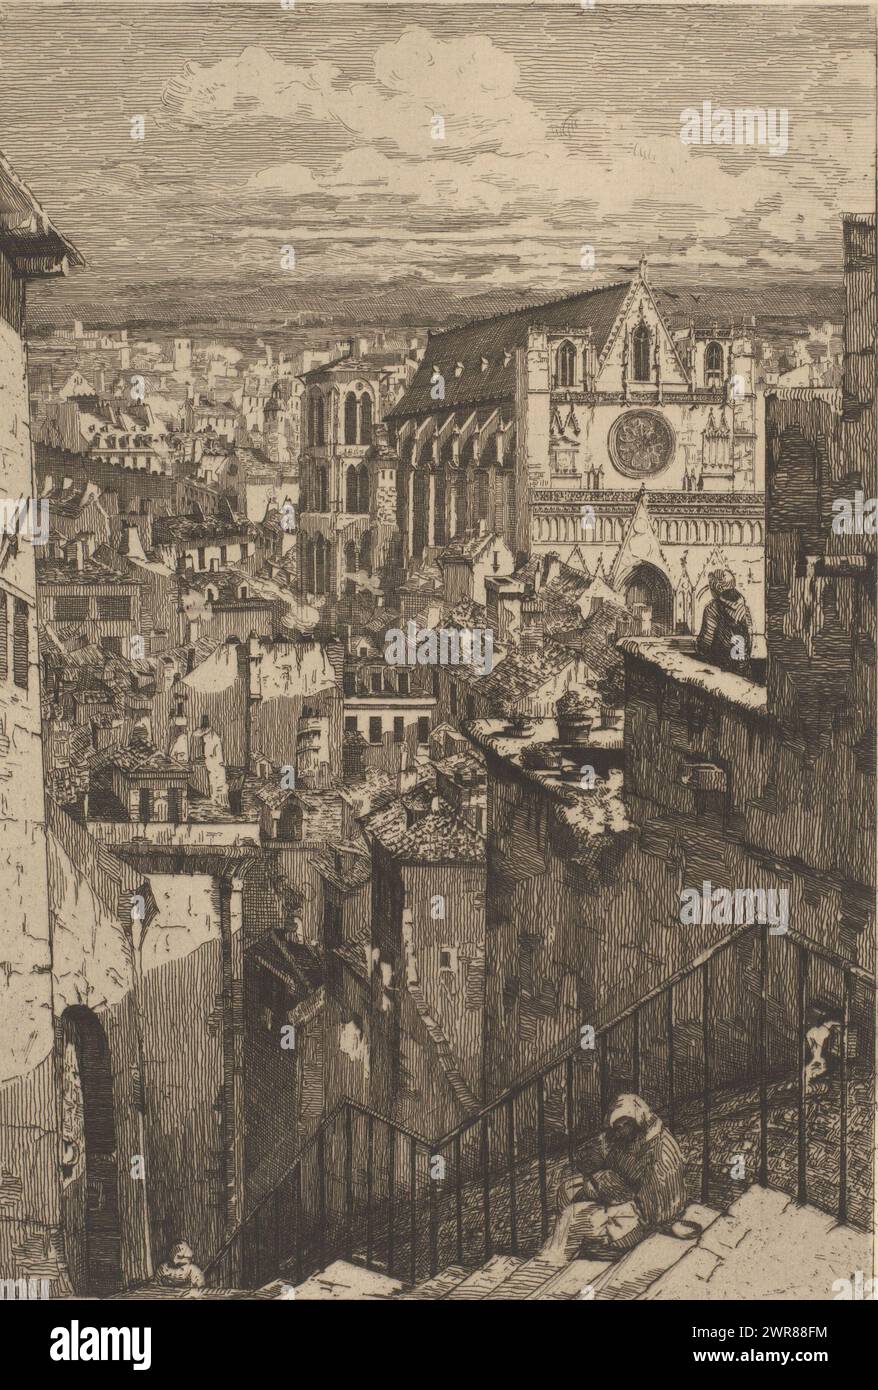 Cityscape with Lyon Cathedral, Eglise Saint-Jean à Lyon, print maker: Gabrielle-Marie Niel, (attributed to), 1850 - 1940, paper, etching, drypoint, height 319 mm × width 239 mm, print Stock Photo